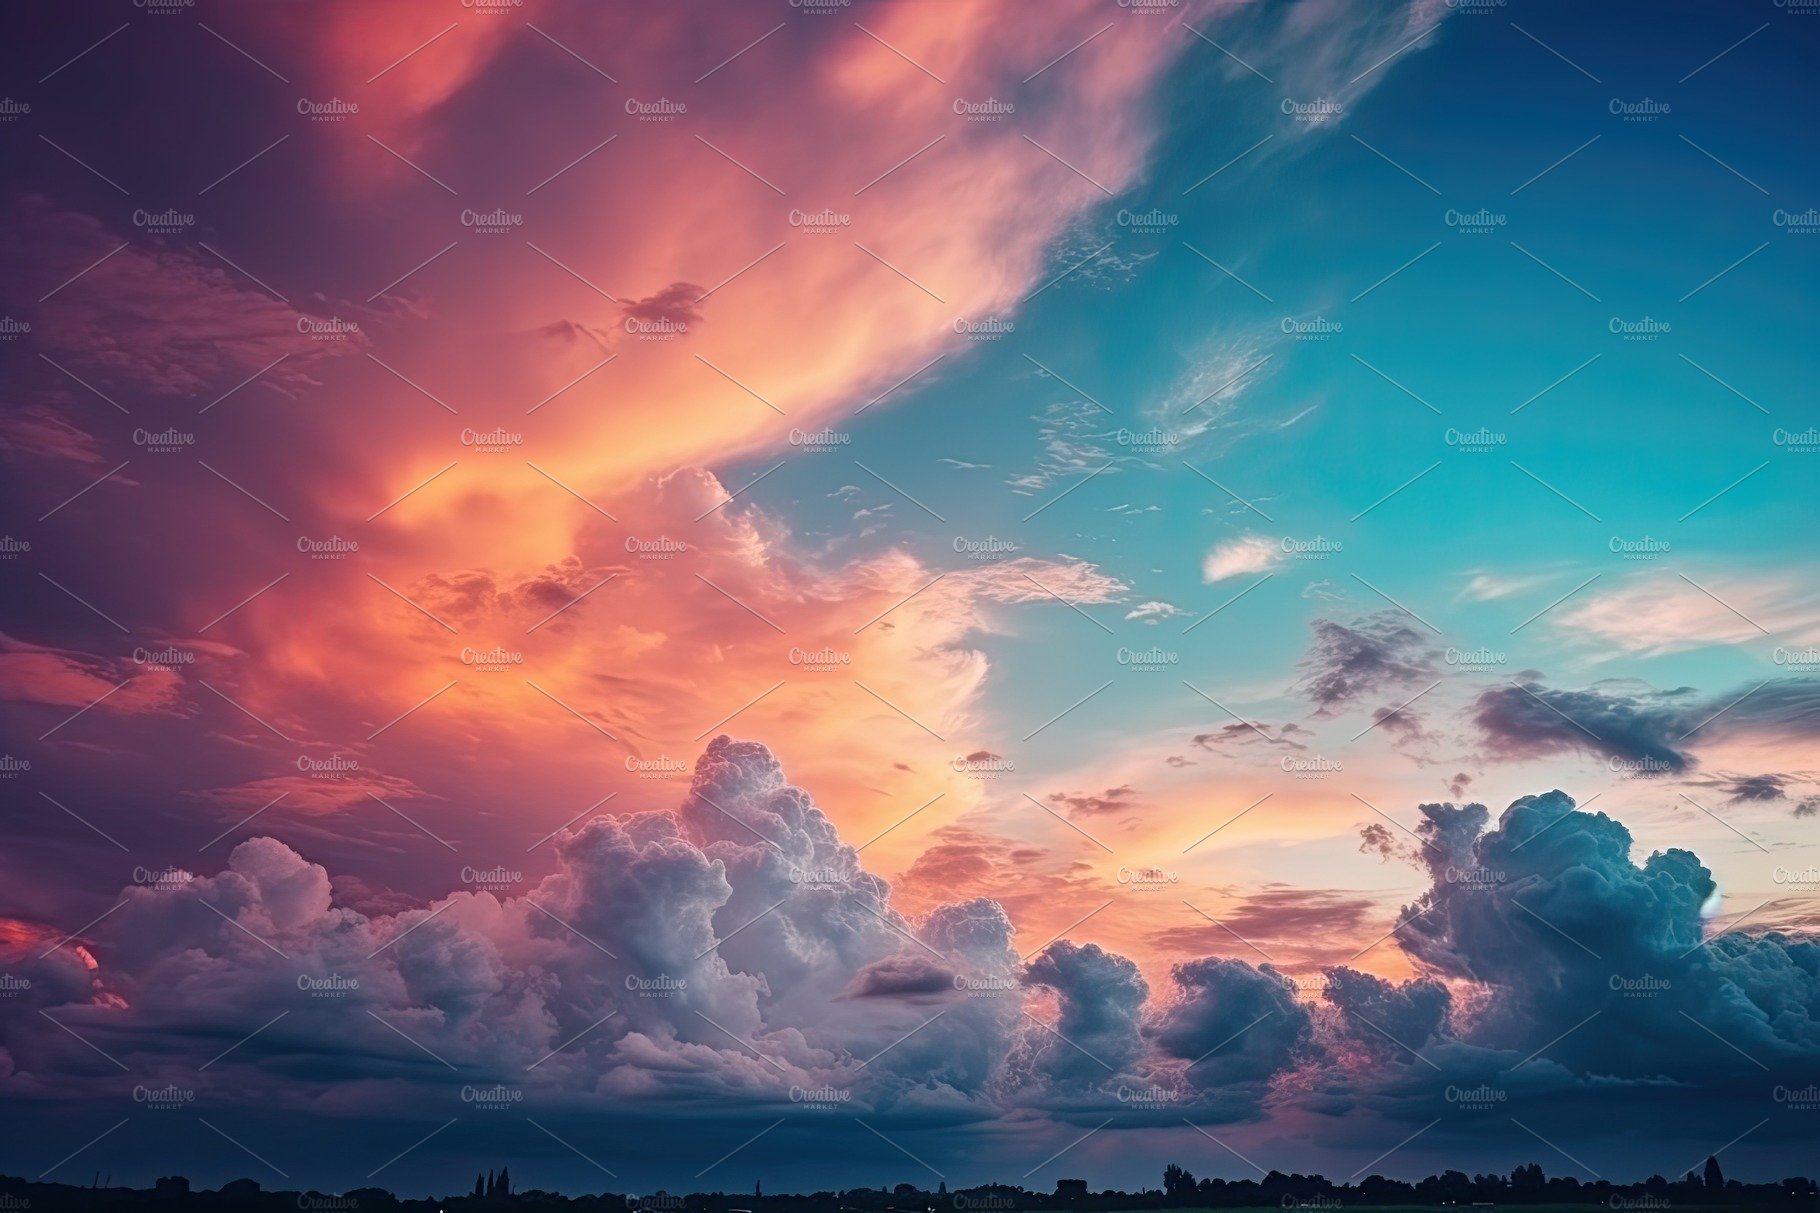 Colorful sky concept. Stunning sunset with vibrant twilight sky and clouds ... cover image.